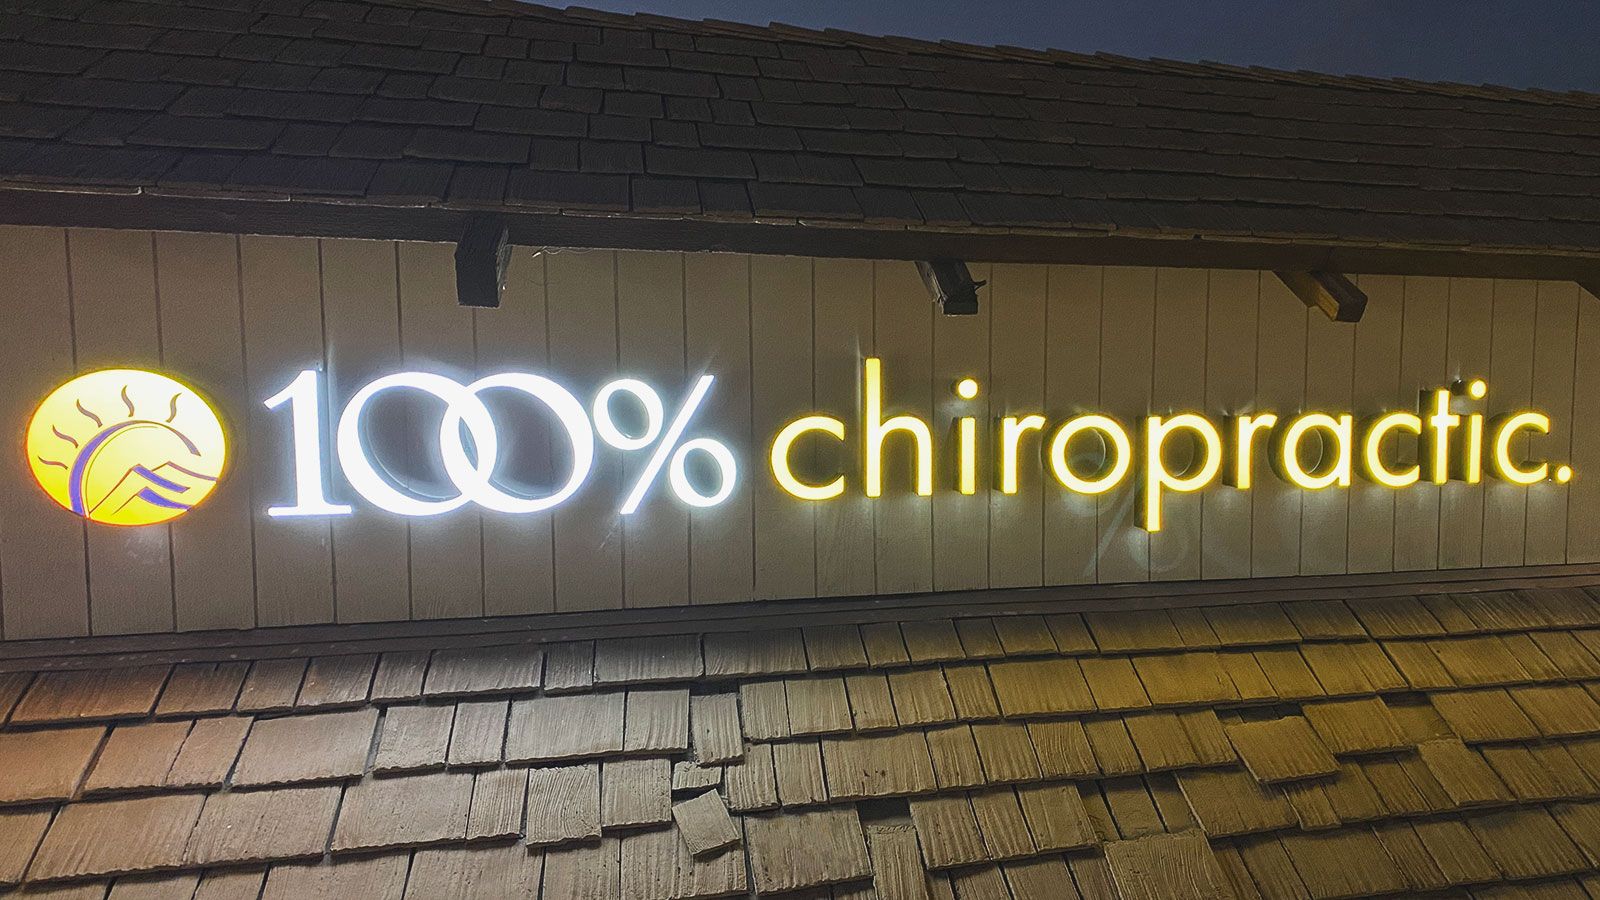 chiropractic channel letters